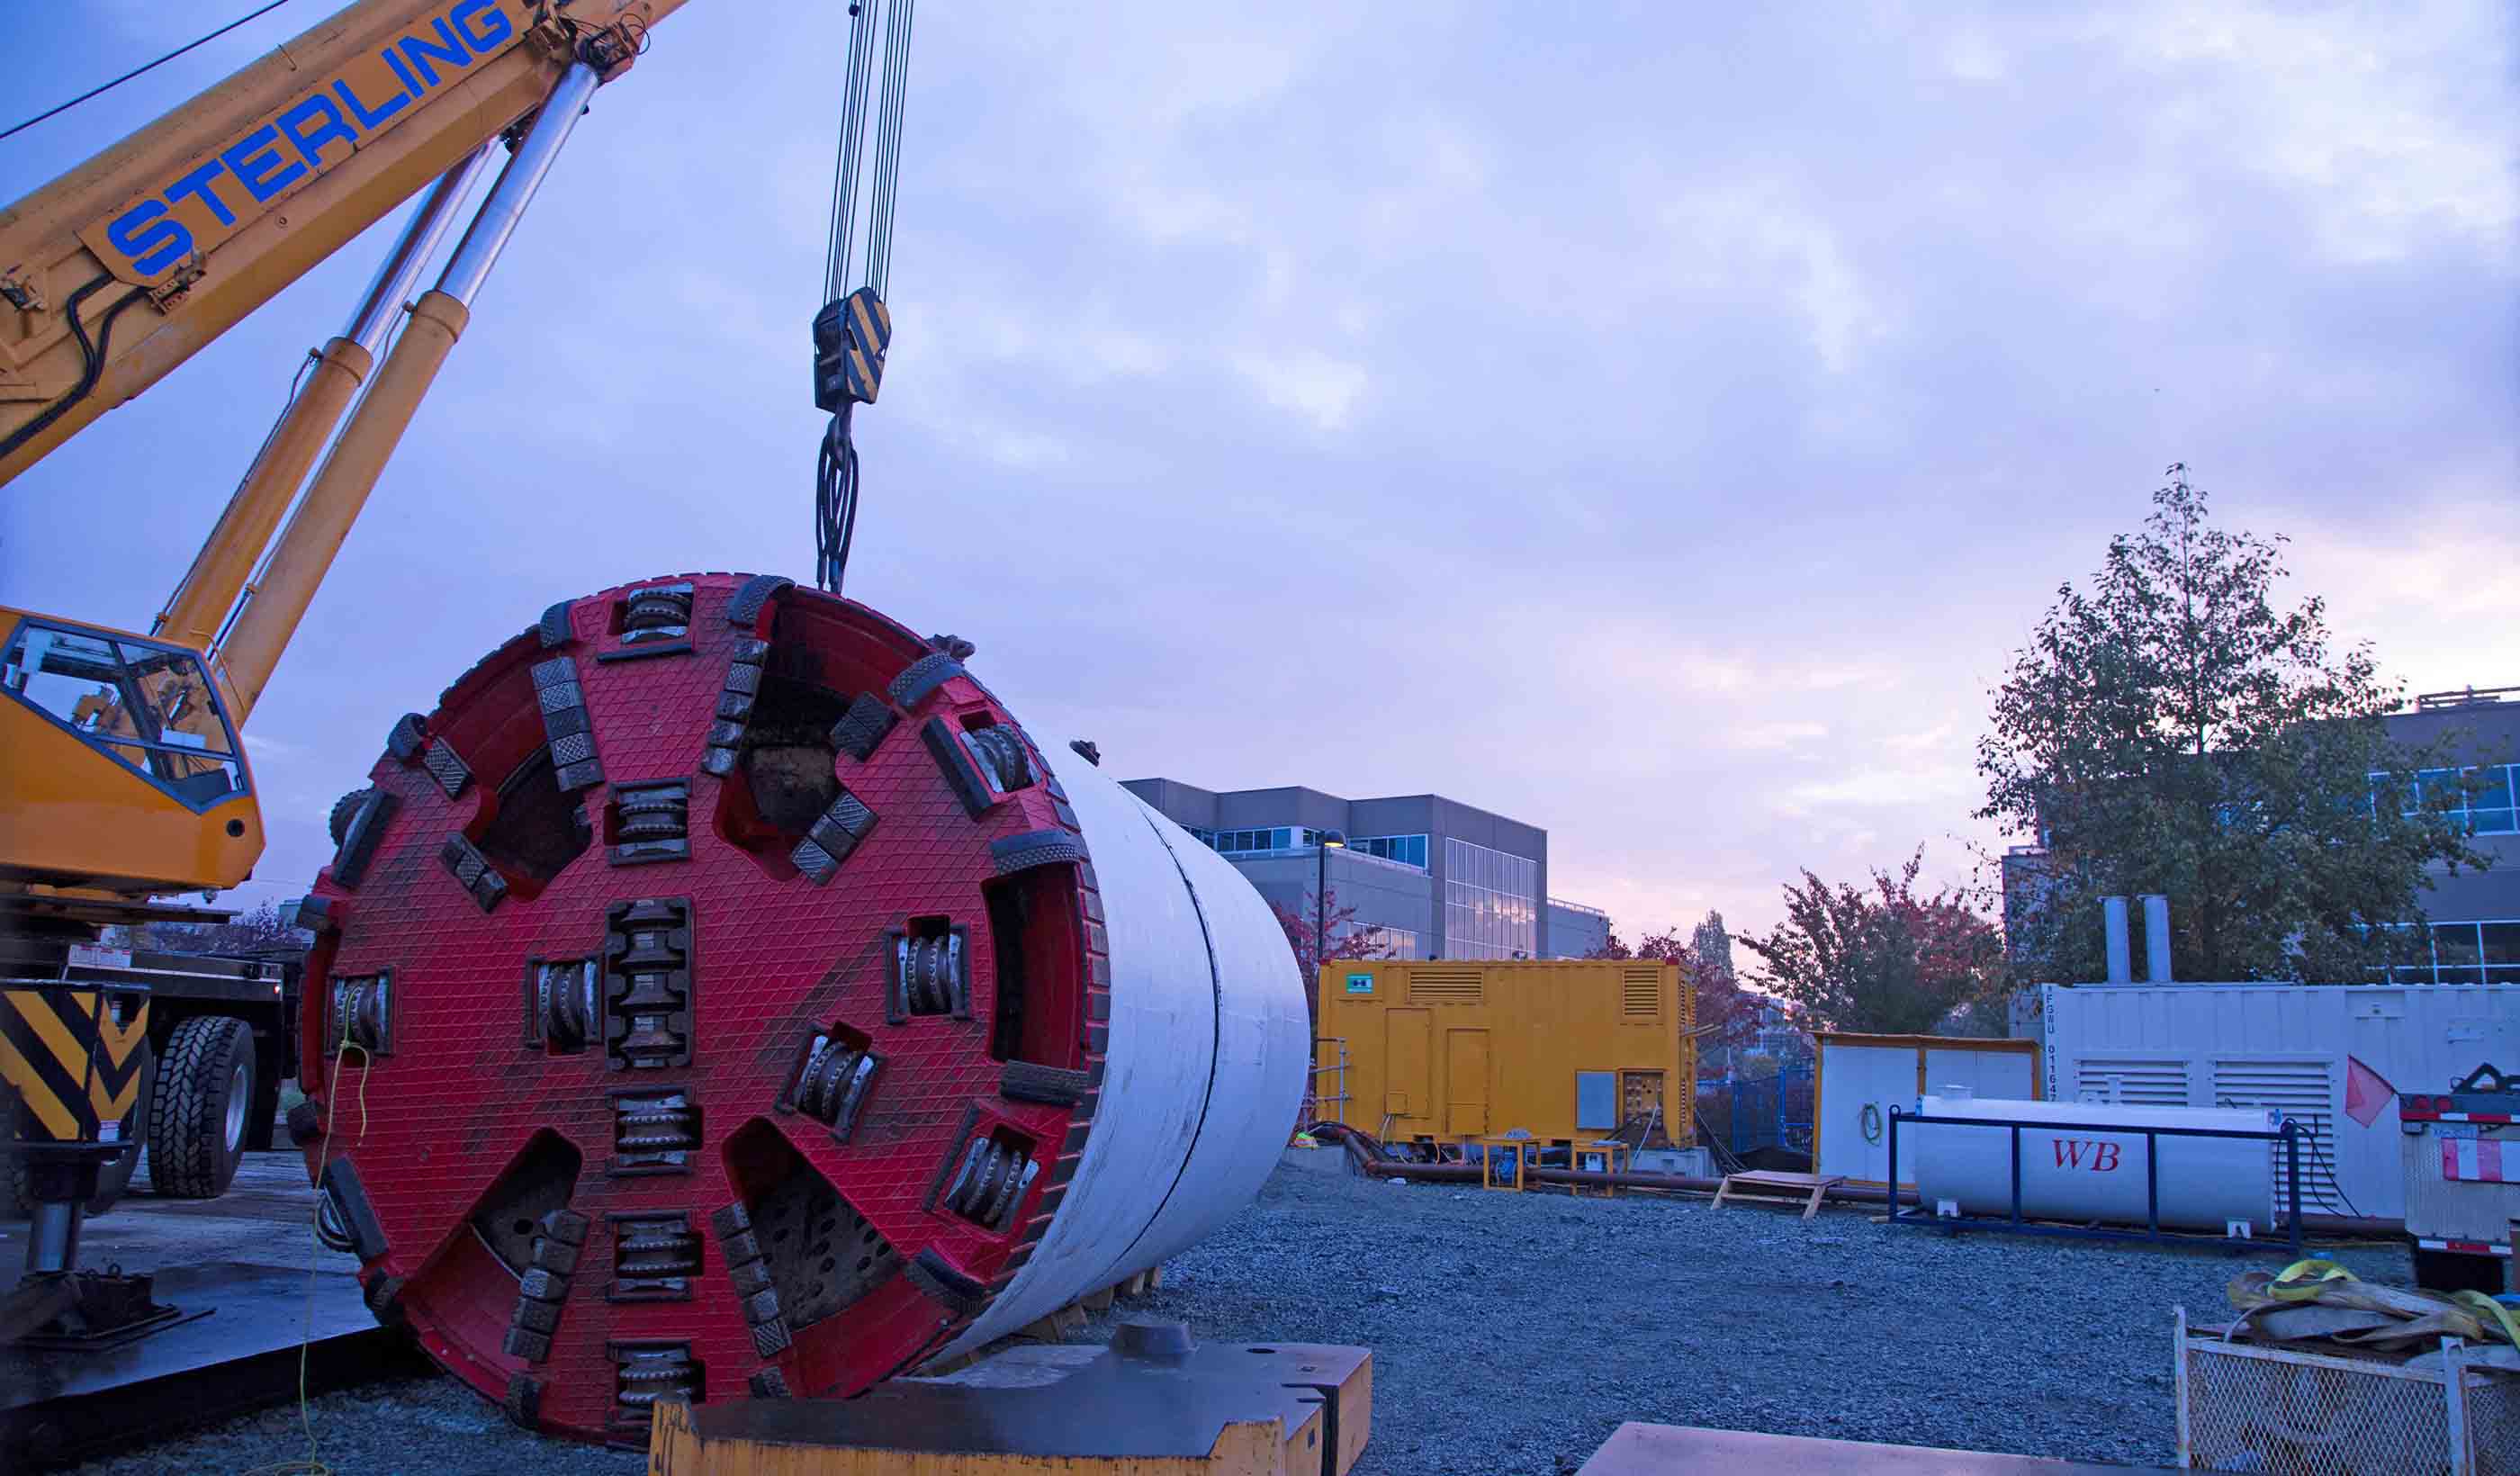 The South Surrey Interceptor: A microtunneling milestone in North America